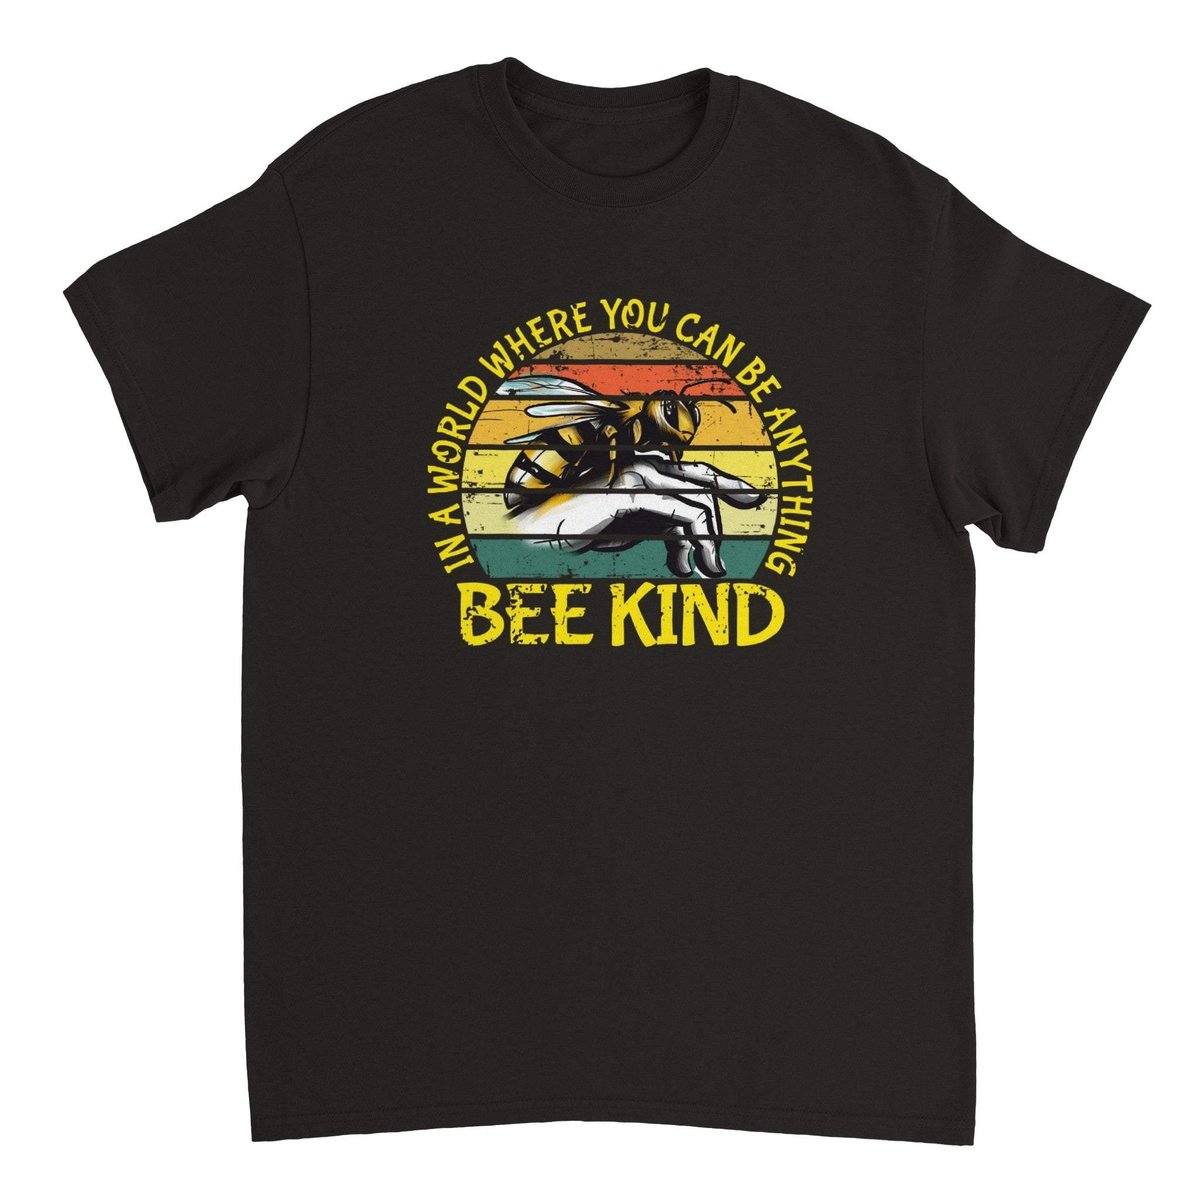 In a world where you can be anything bee kind Tshirt - Retro Vintage Bee - Unisex Crewneck T-shirt Australia Online Color